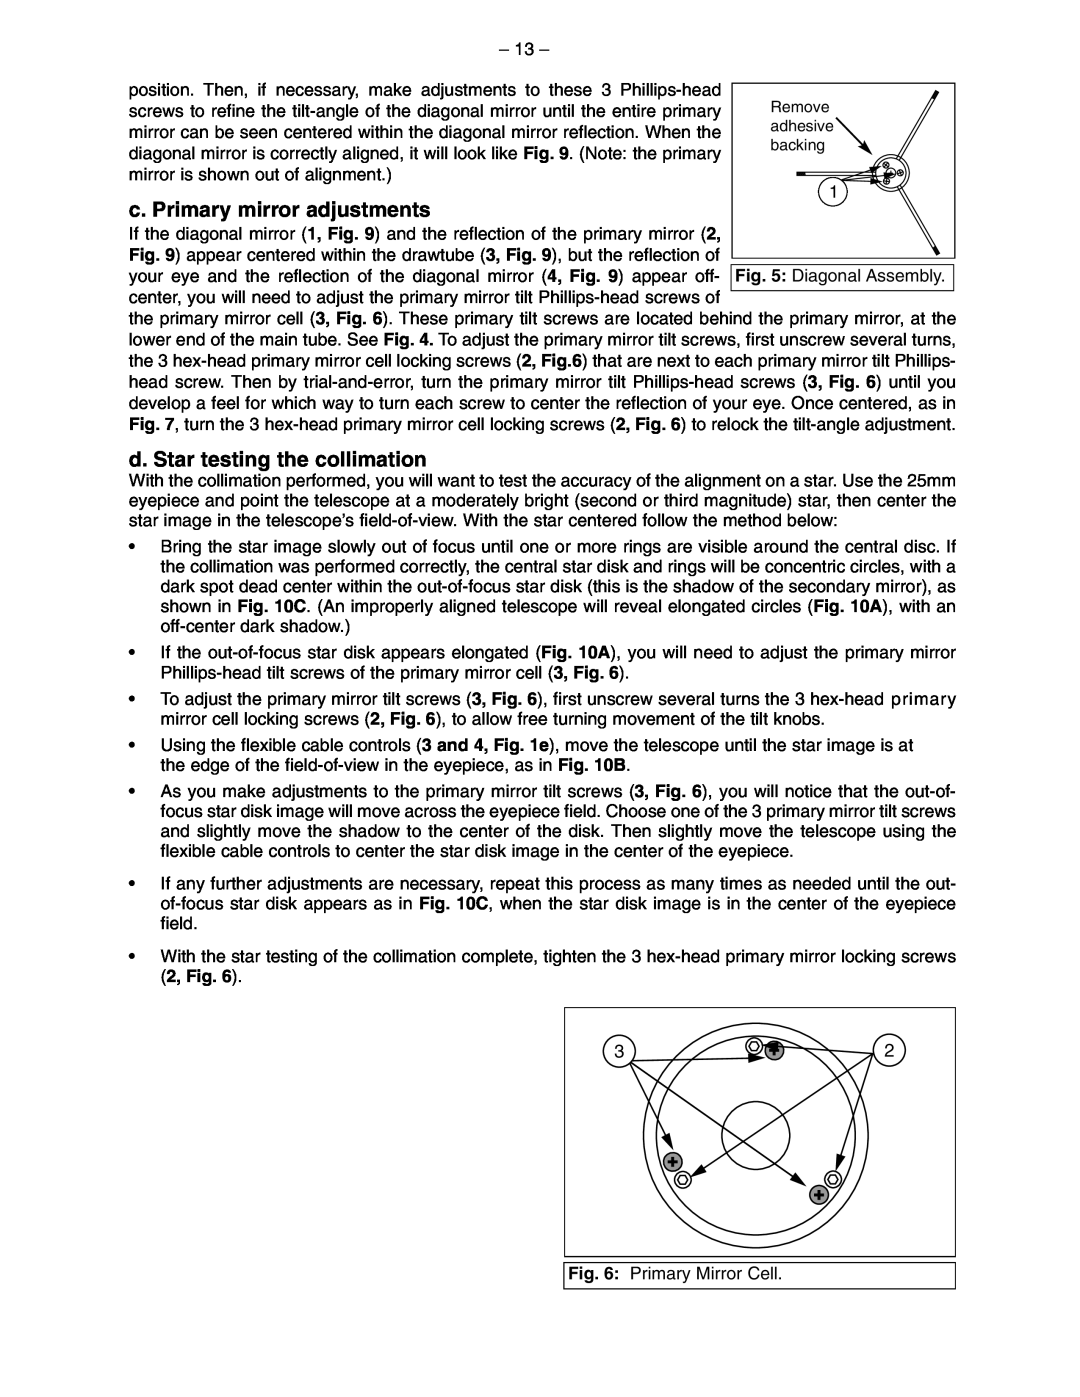 Meade 114 EQ-ASB instruction manual c. Primary mirror adjustments, d. Star testing the collimation 